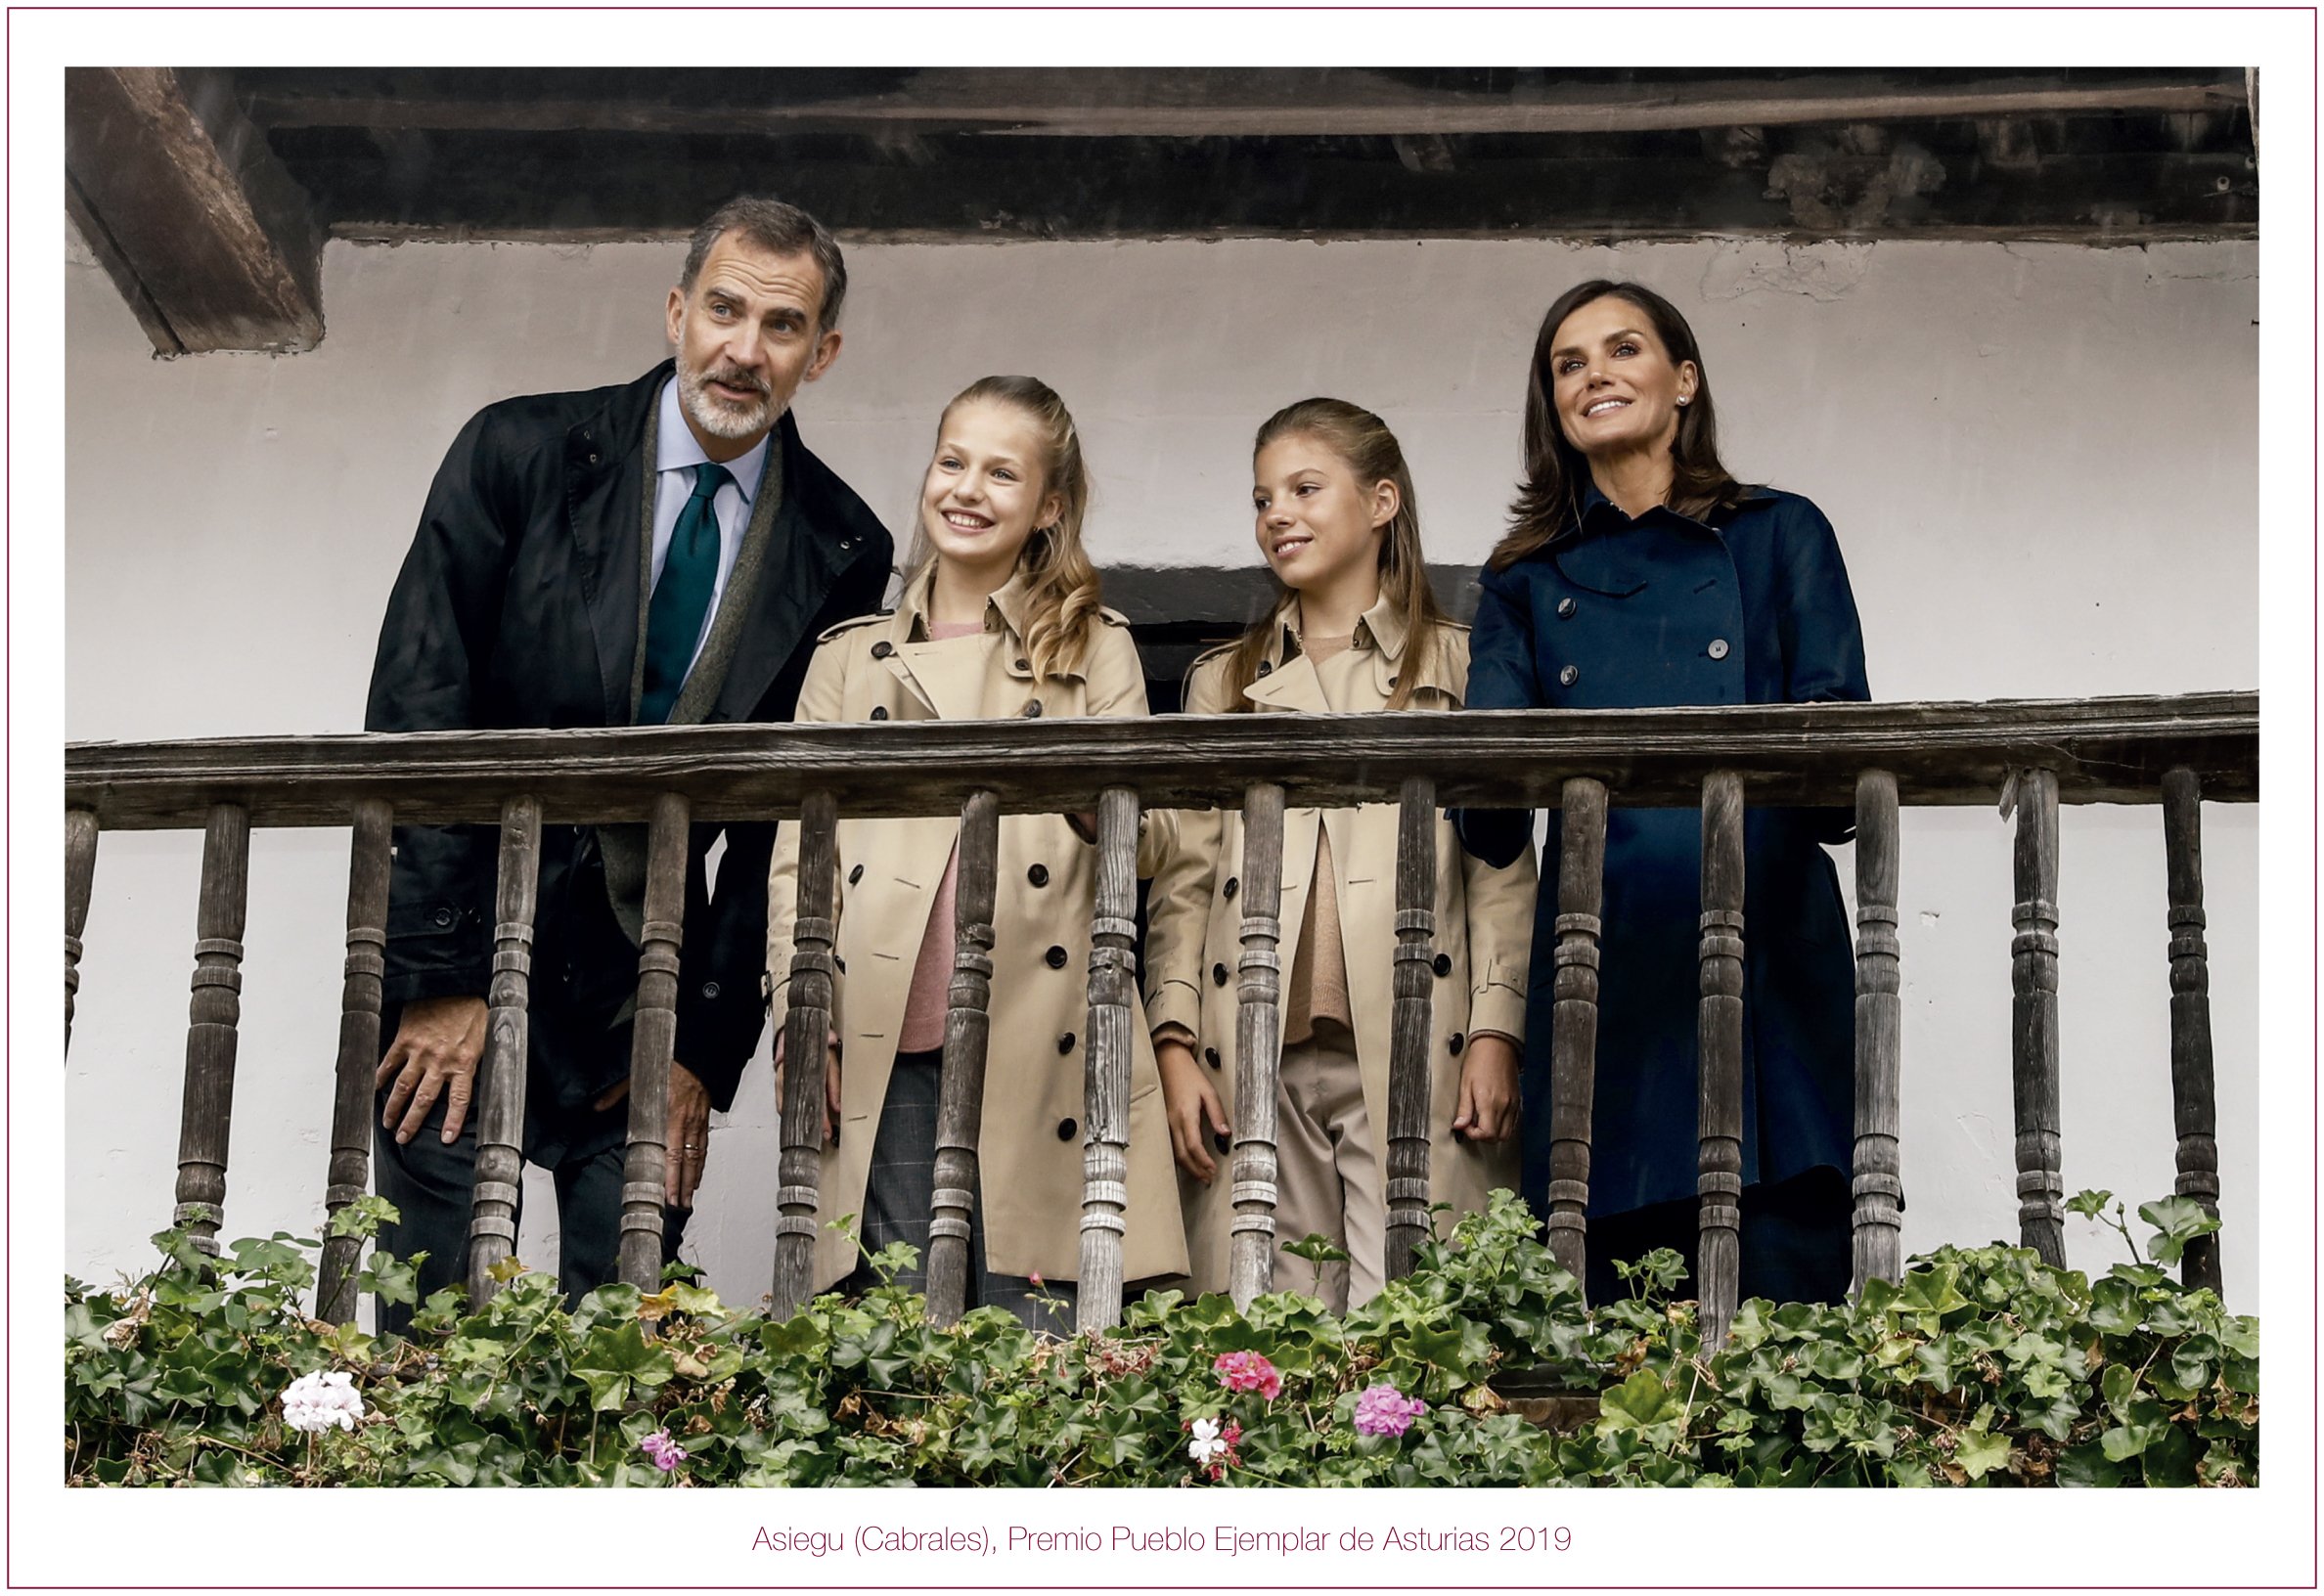 King Felipe with Queen Letizia and their children Princess Leonor and Princess Sofia on December 10, 2018 in Madrid, Spain. / Source: Getty Images